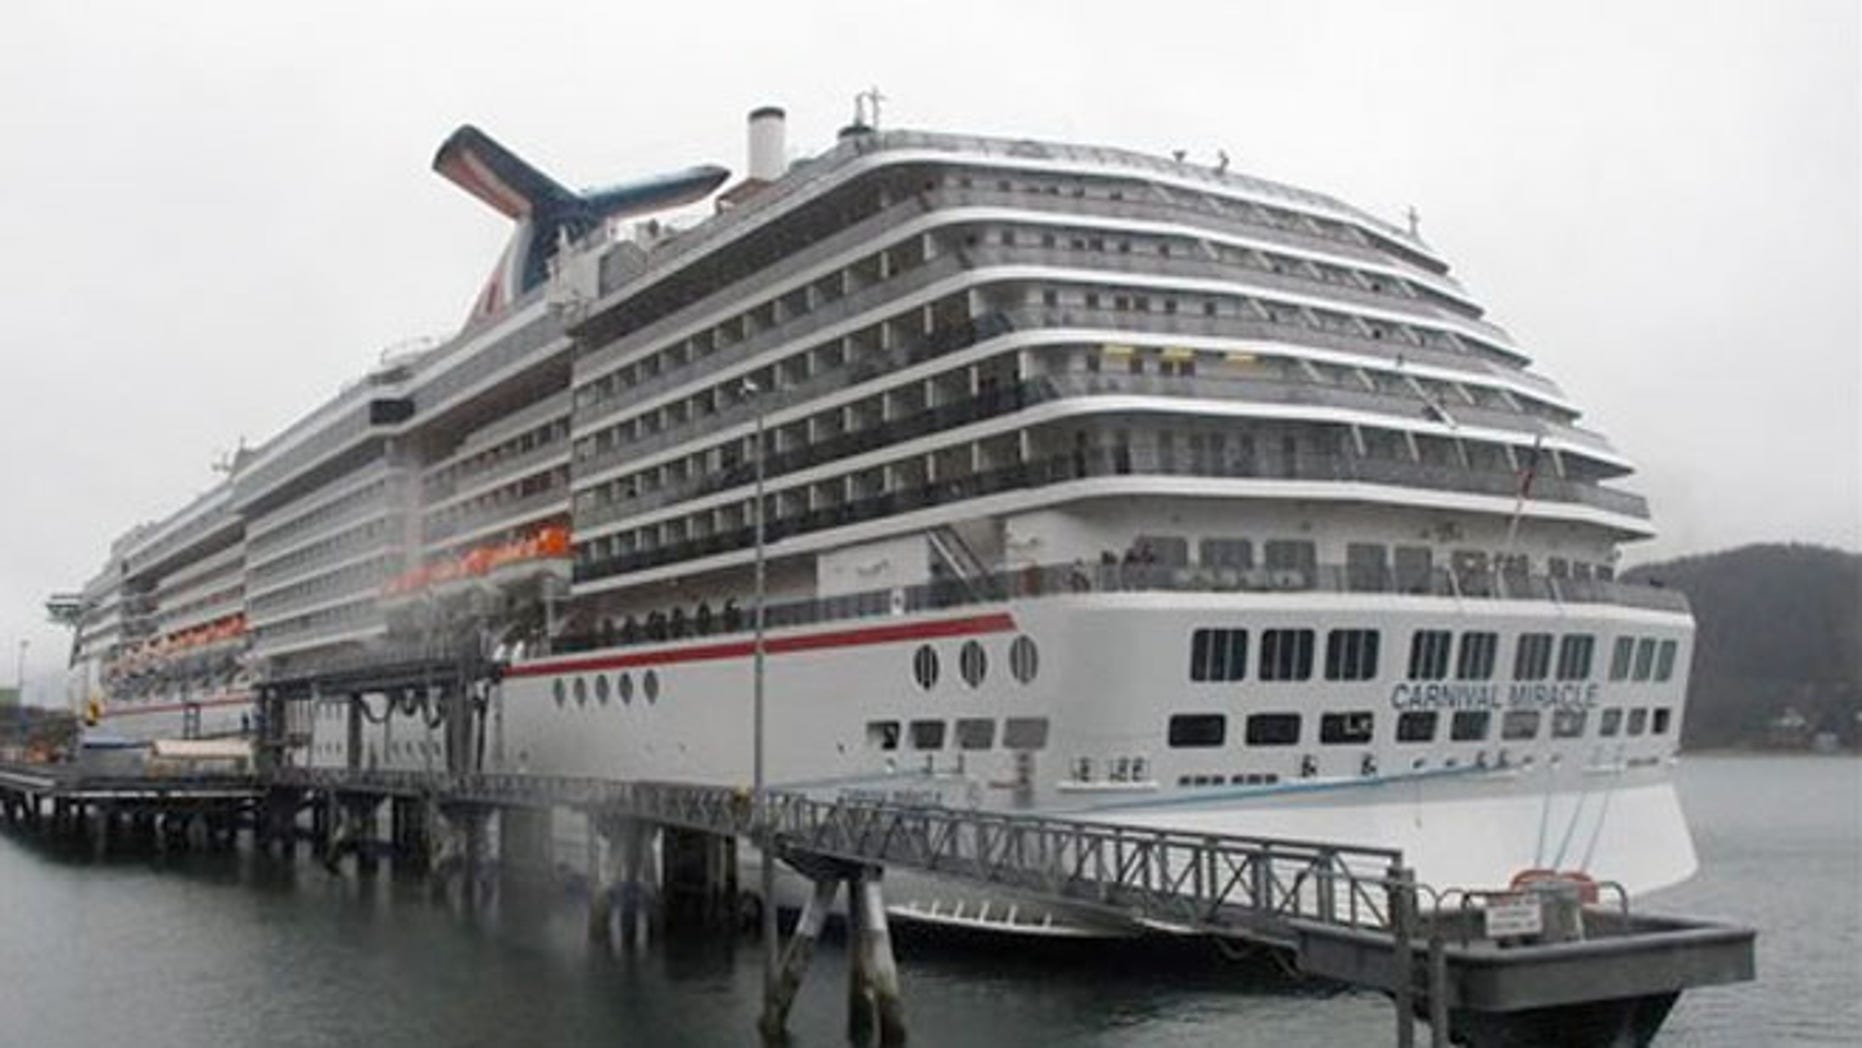 Carnival Miracle departs after two days stuck in Tampa Port Fox News